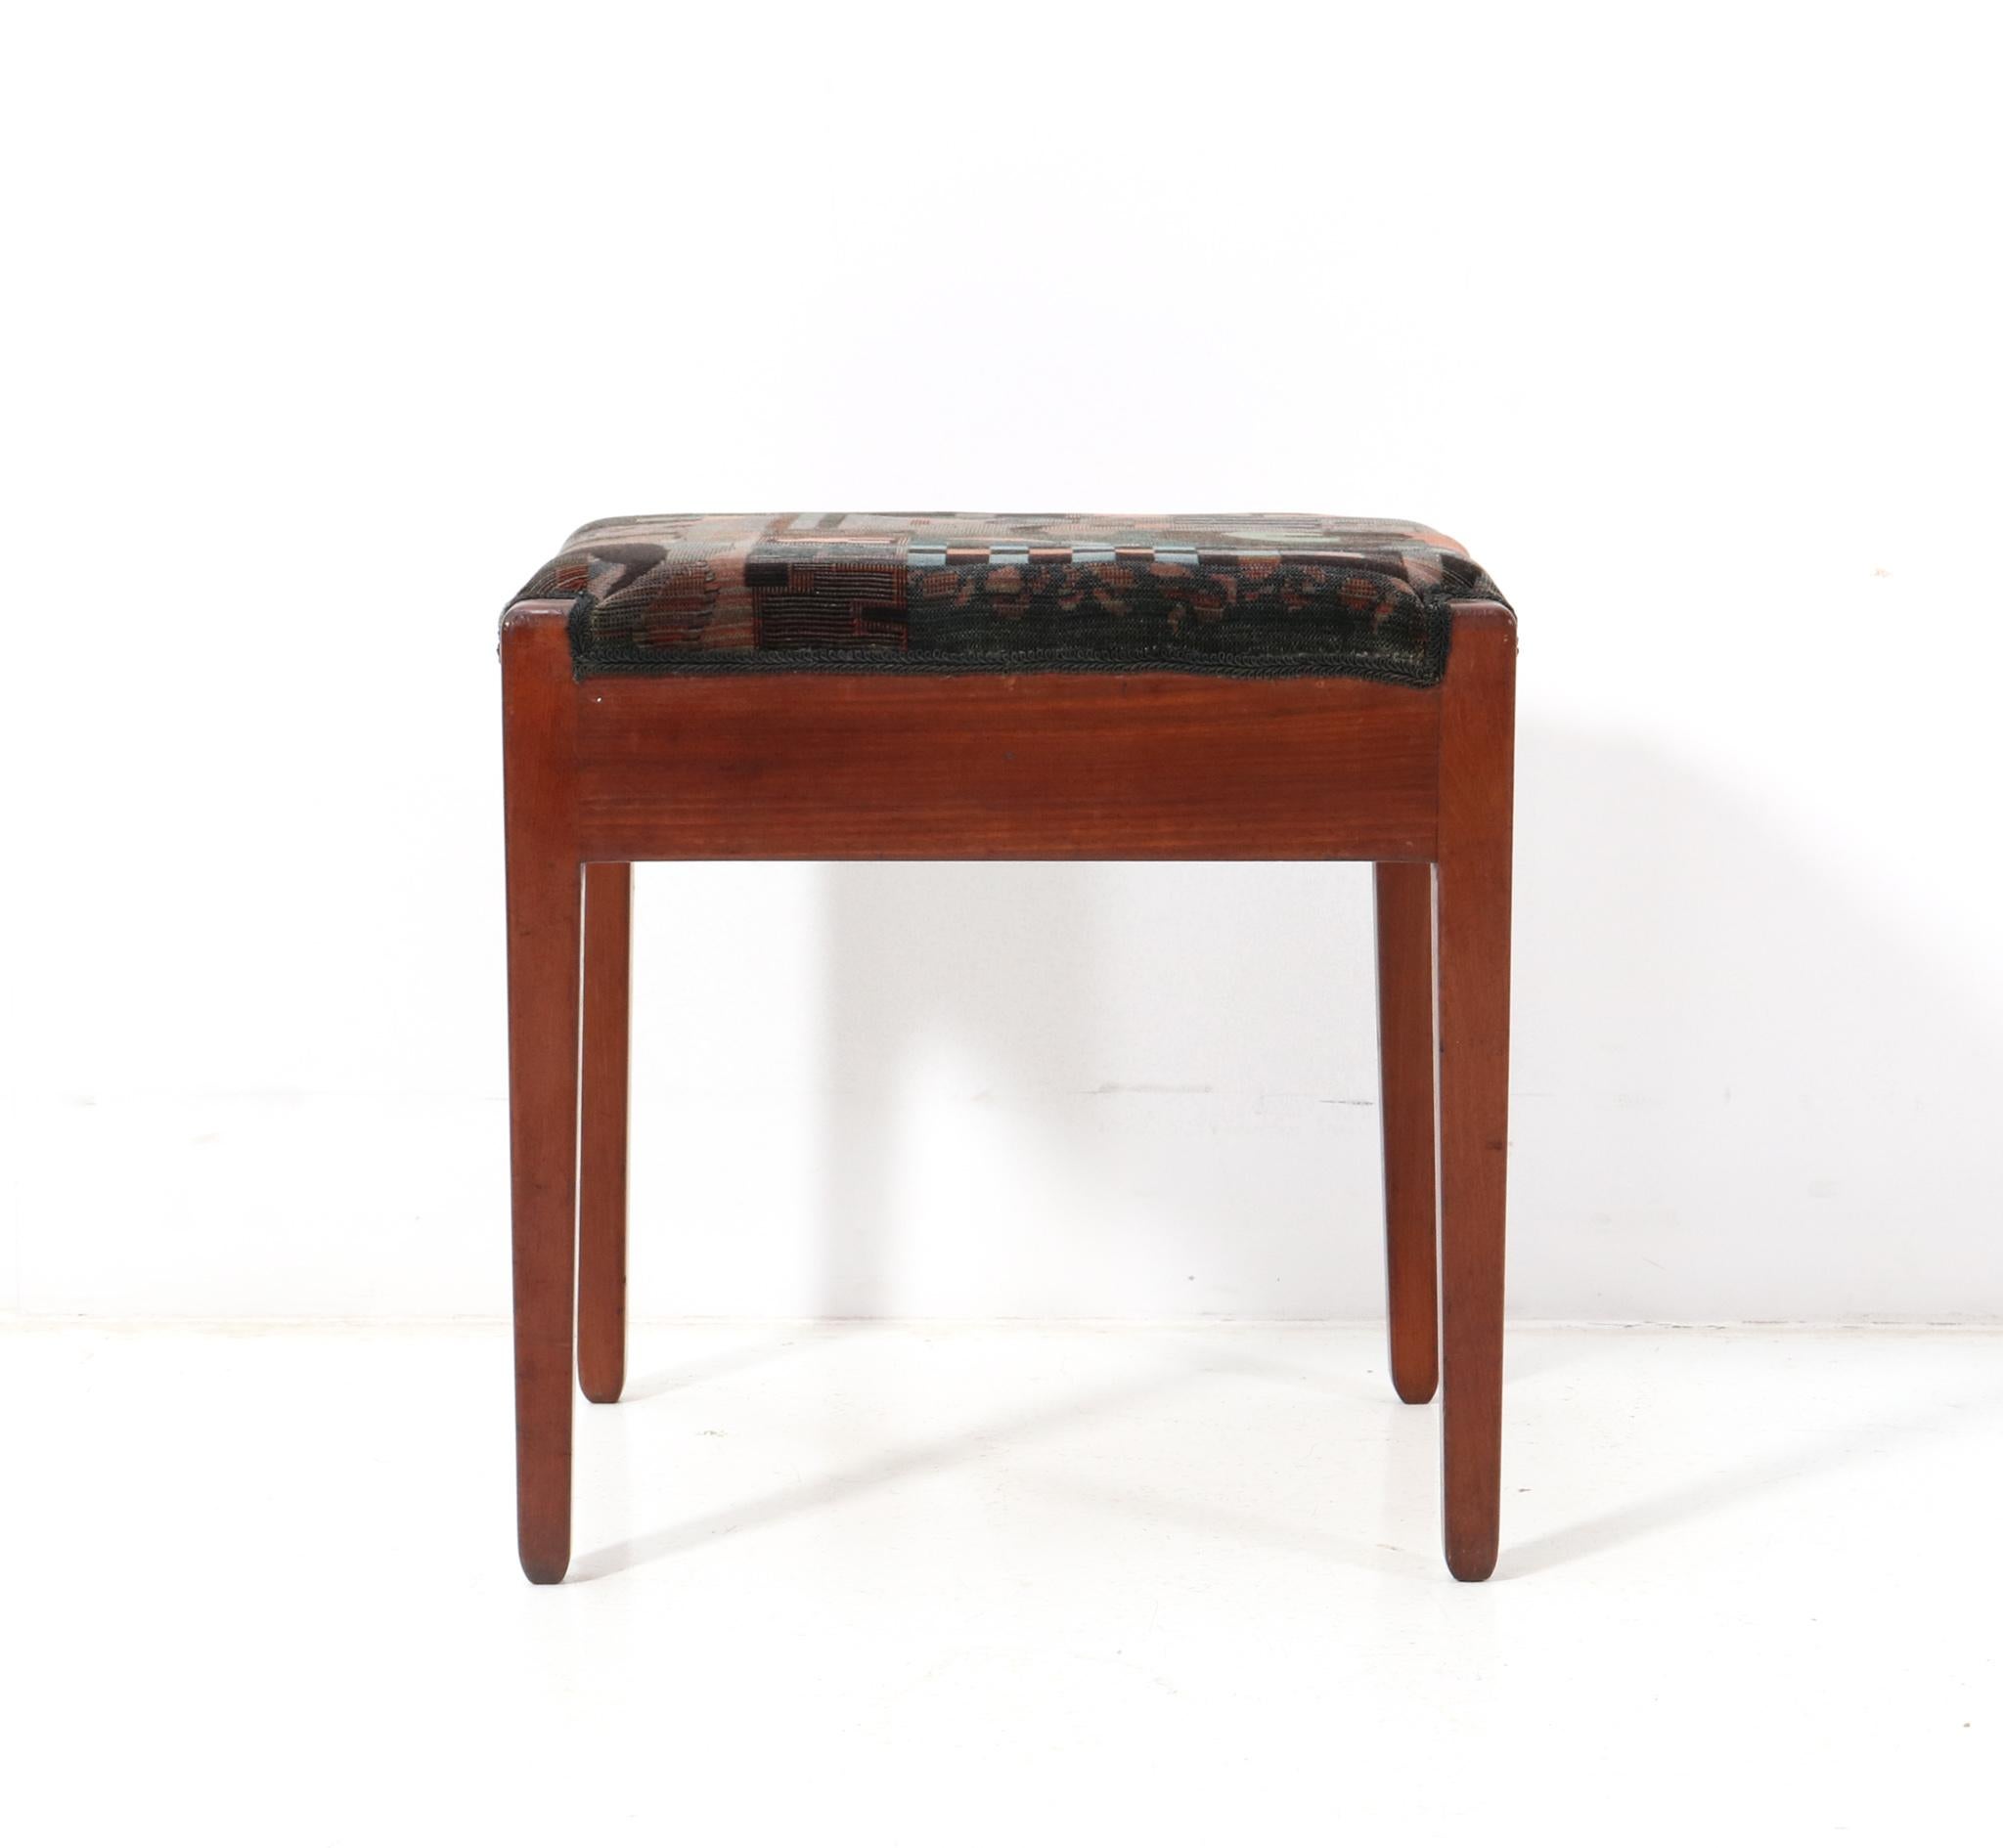 Early 20th Century Walnut Art Deco Modernist Stool by L.O.V. Oosterbeek, 1920s For Sale